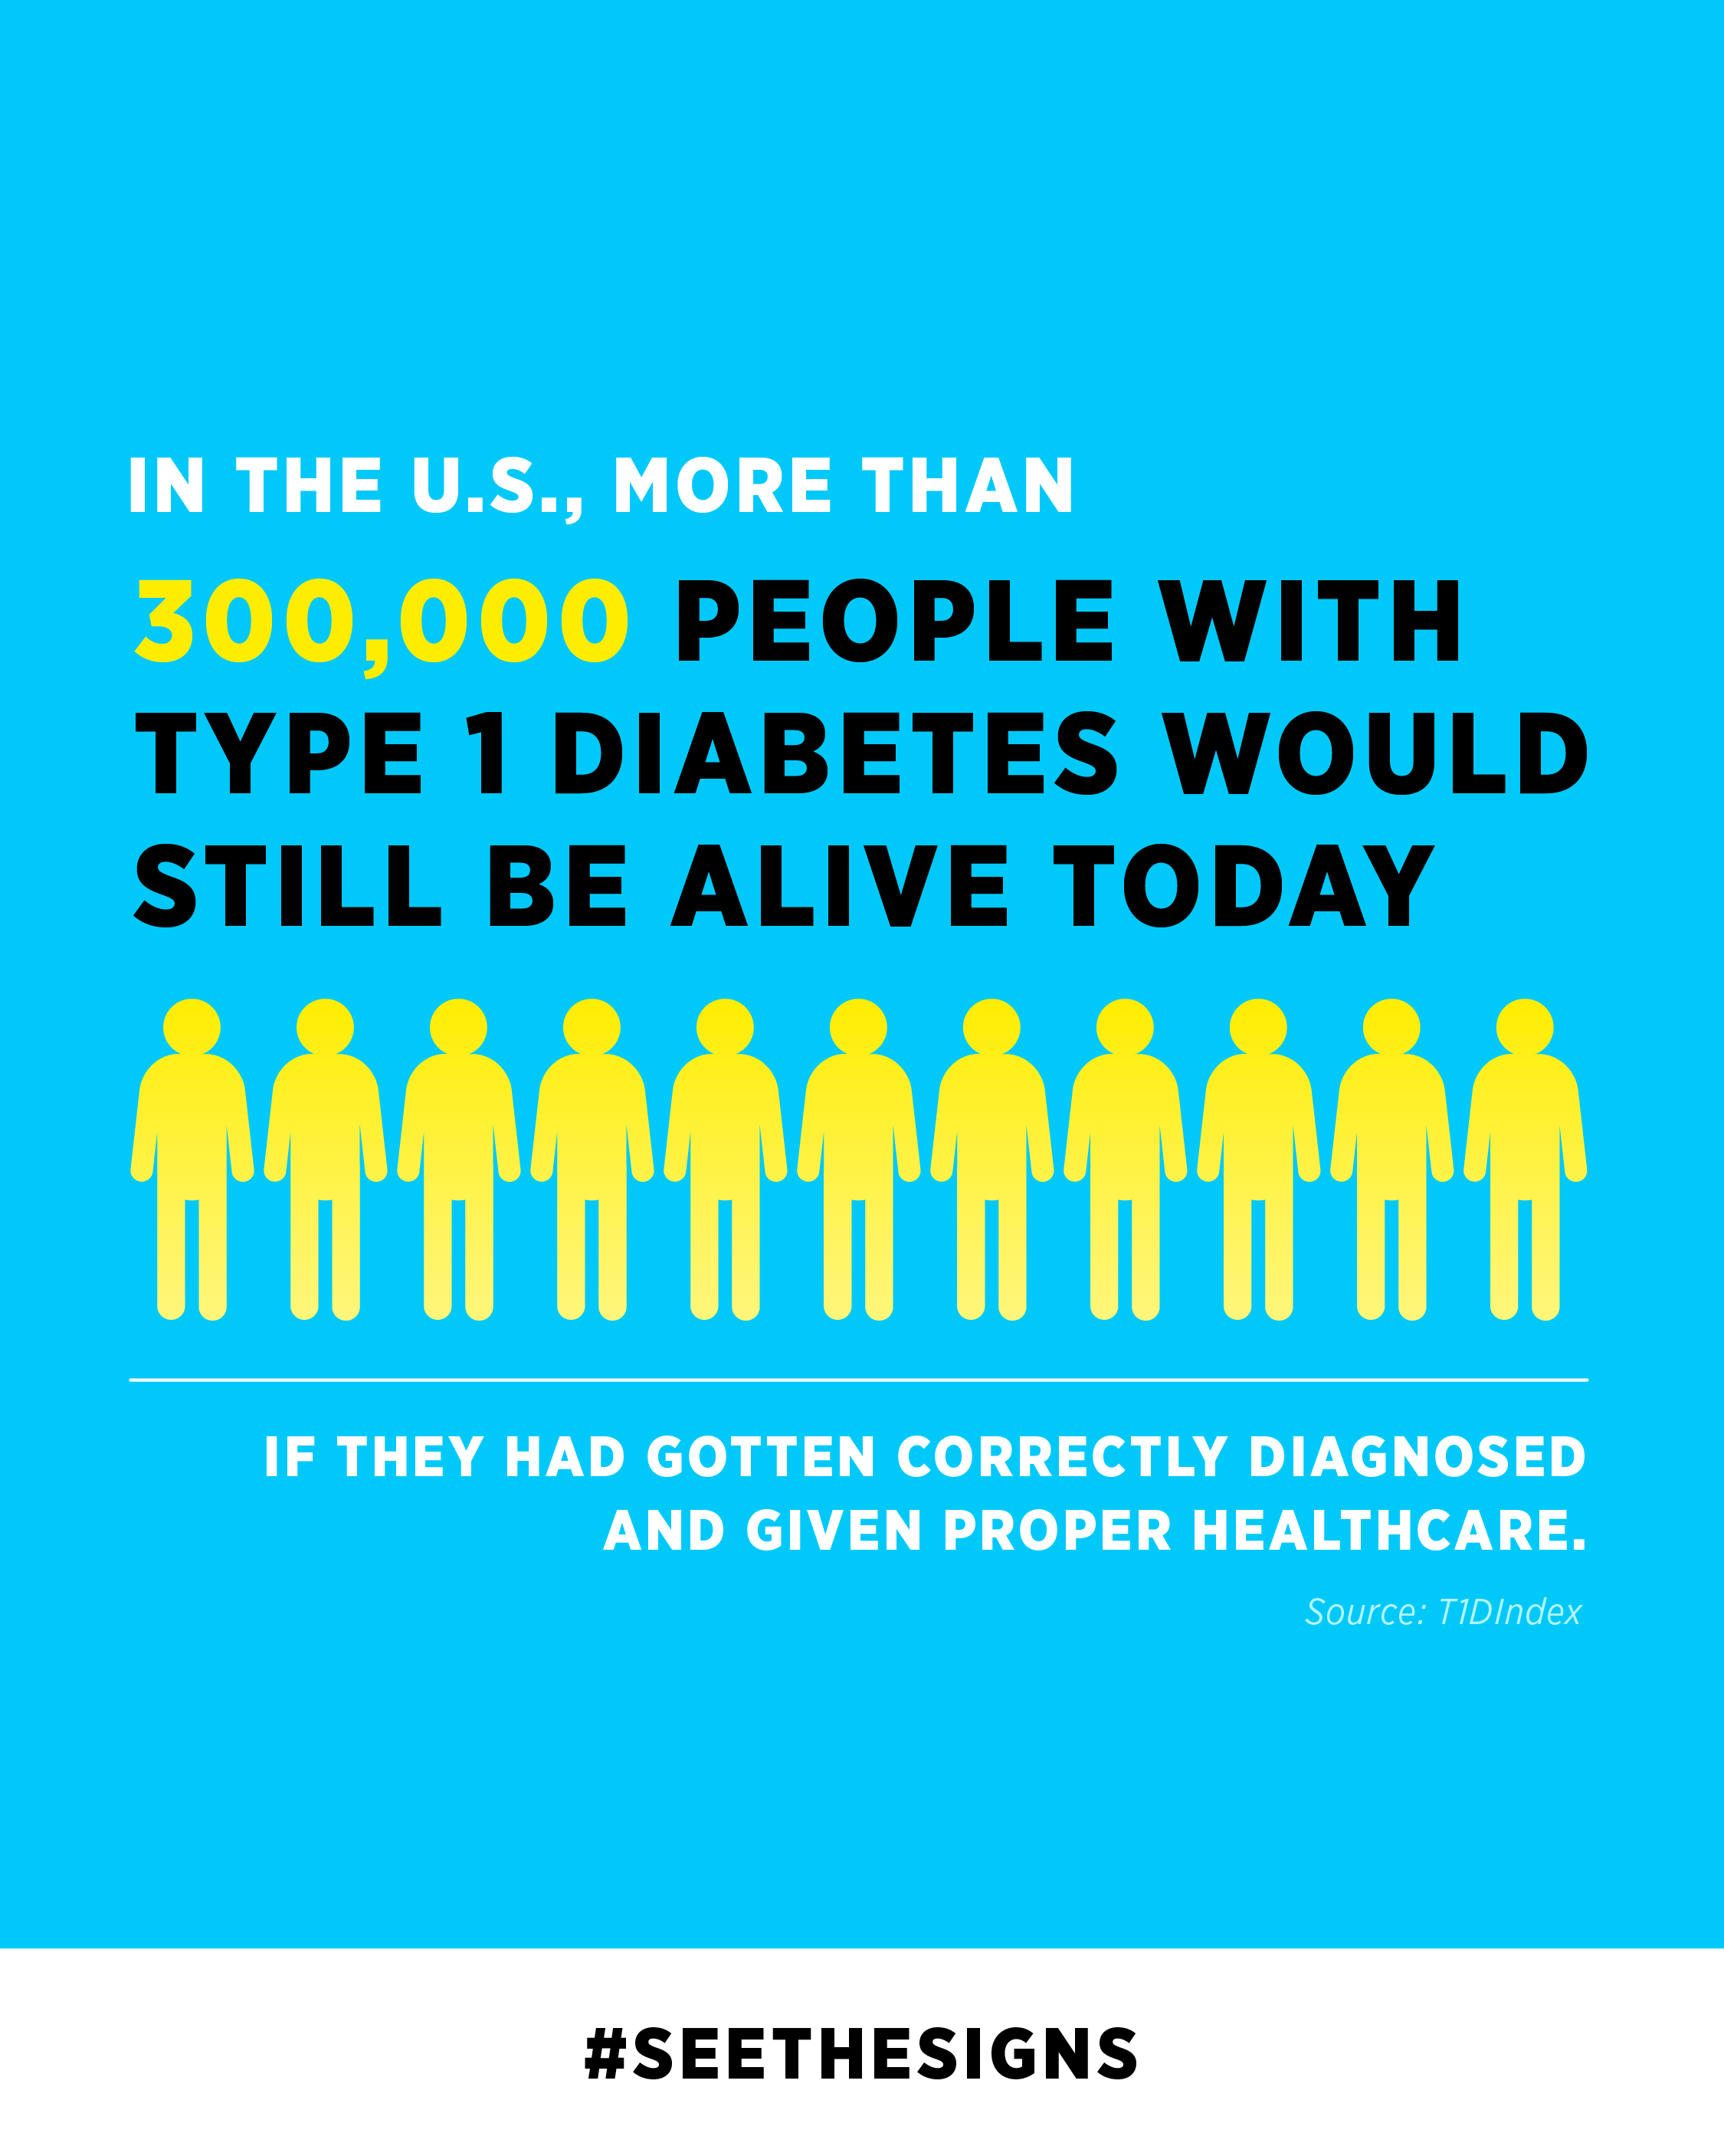 In the U.S. more than 300,000 people with type 1 diabetes would still be alive today